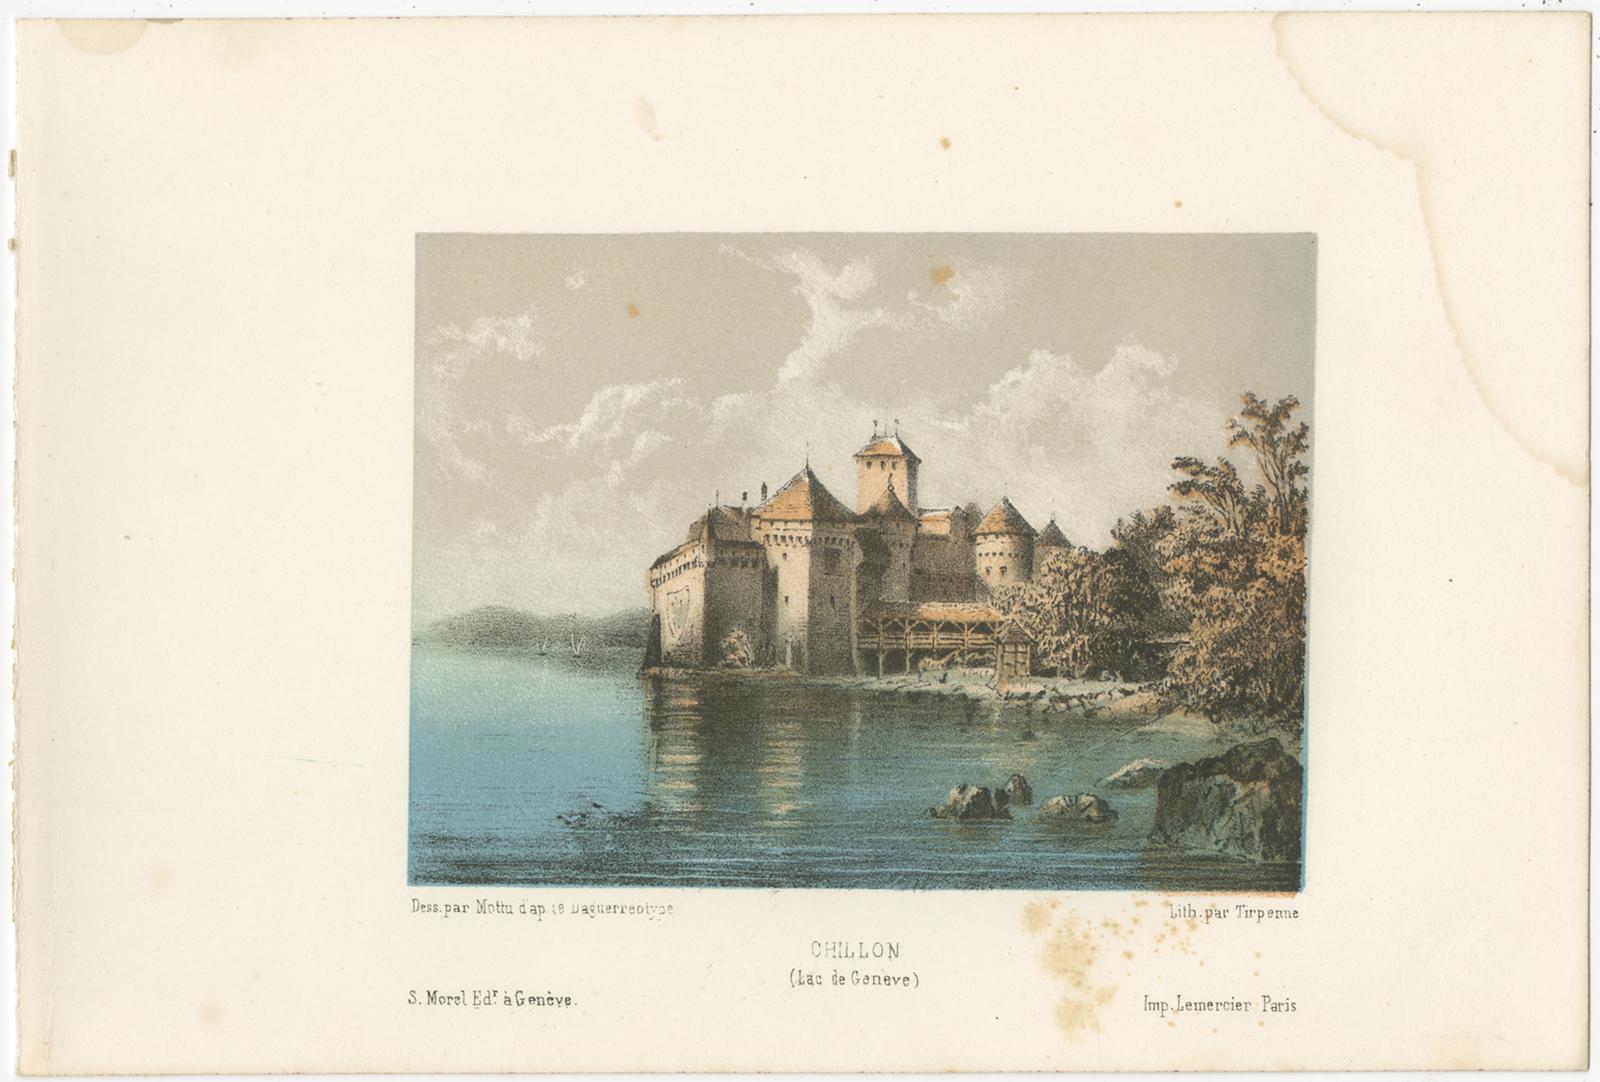 19th Century Set of 3 Antique Prints of Switzerland, Chillon, by Morel 'circa 1850' For Sale